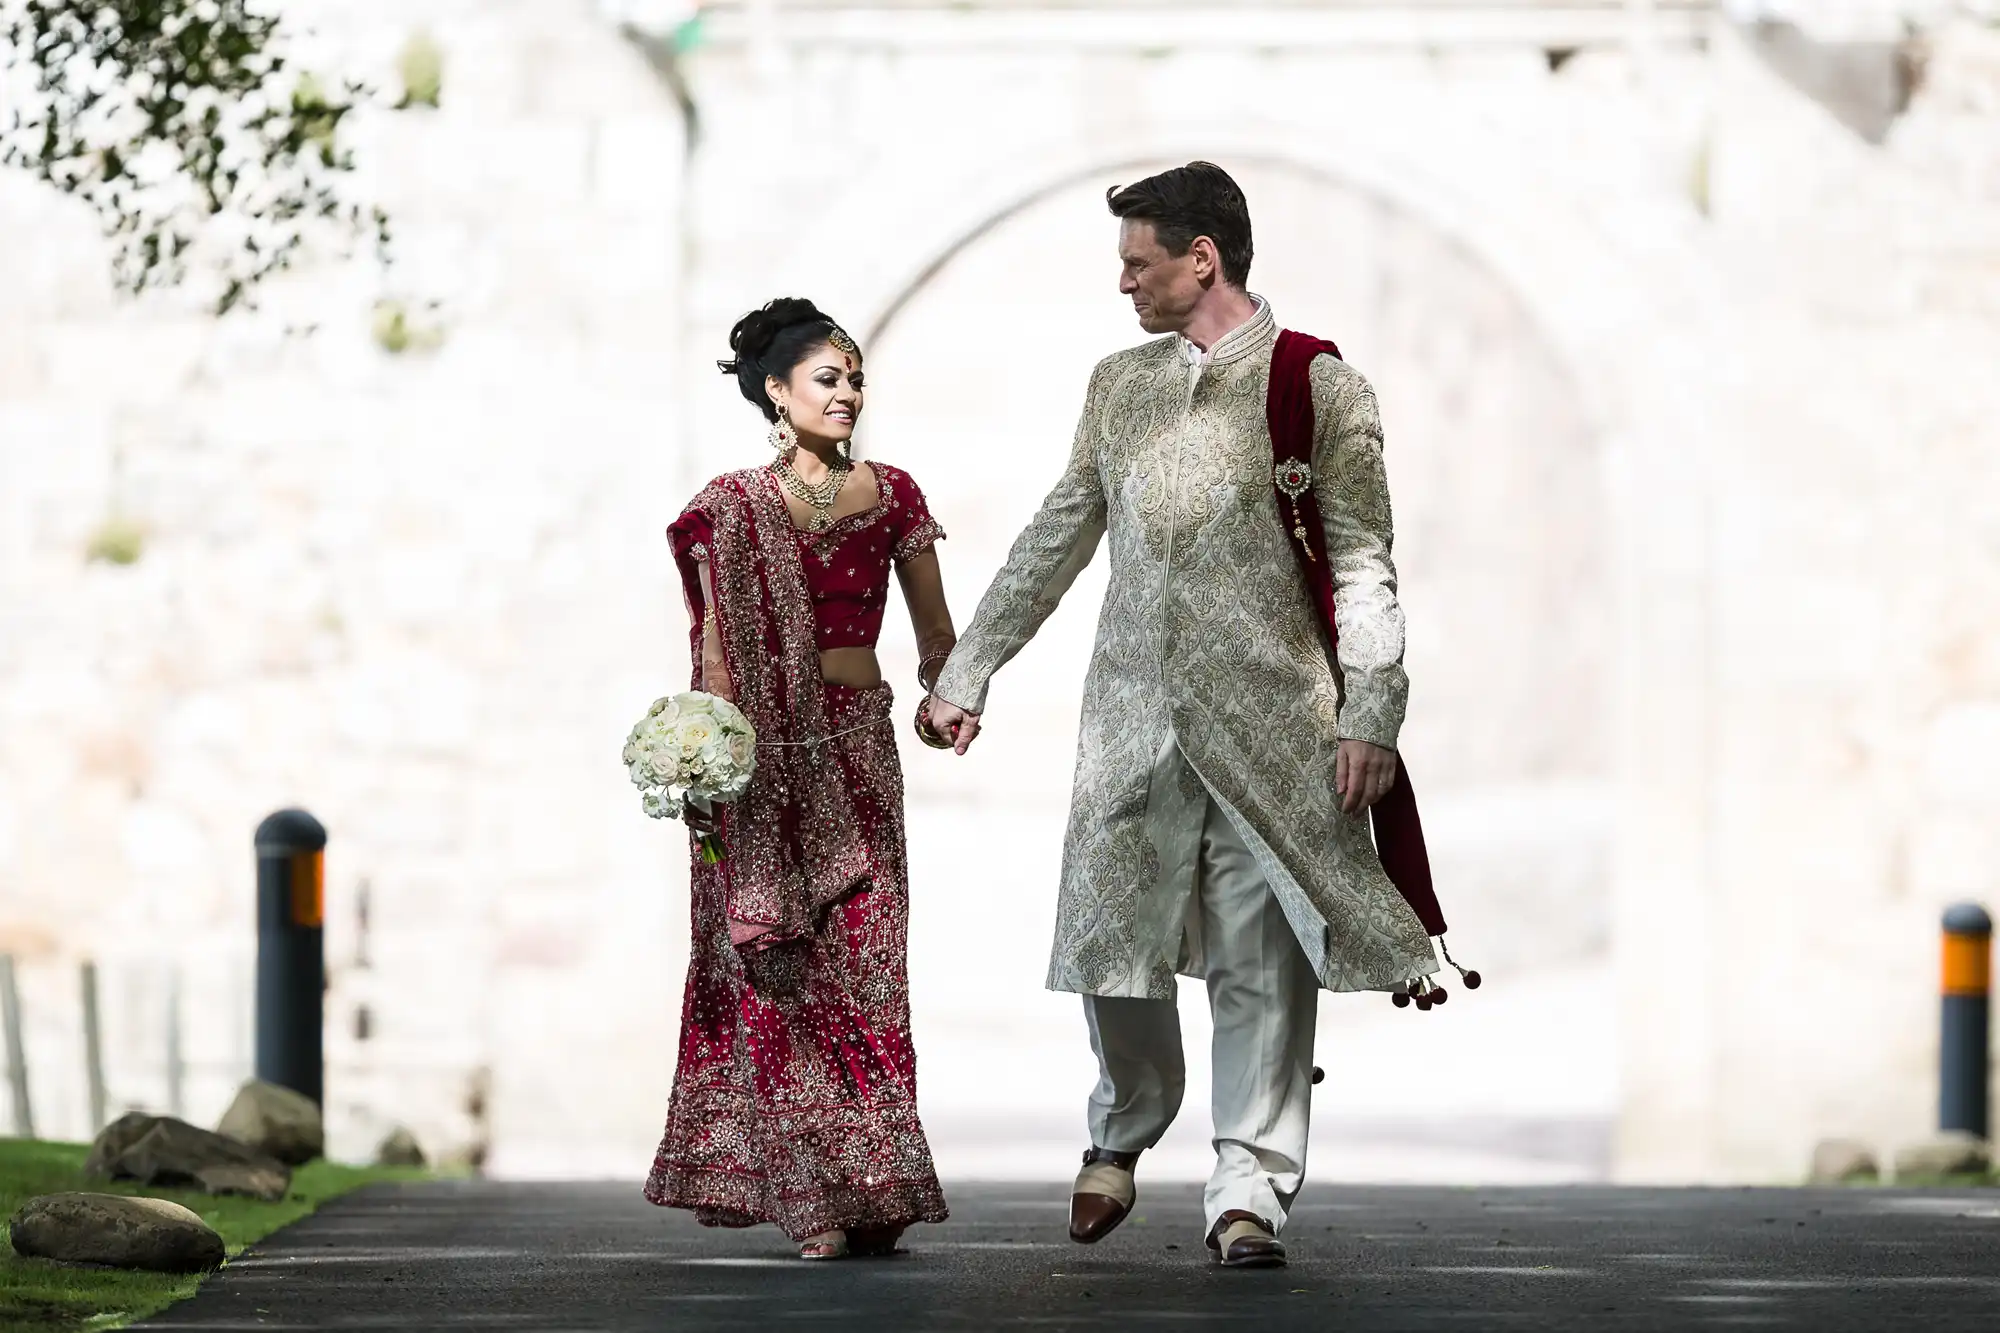 A bride and groom hold hands and walk outdoors. The bride wears a red and gold sari and holds a bouquet. The groom wears a light-colored sherwani. Both appear to be smiling.